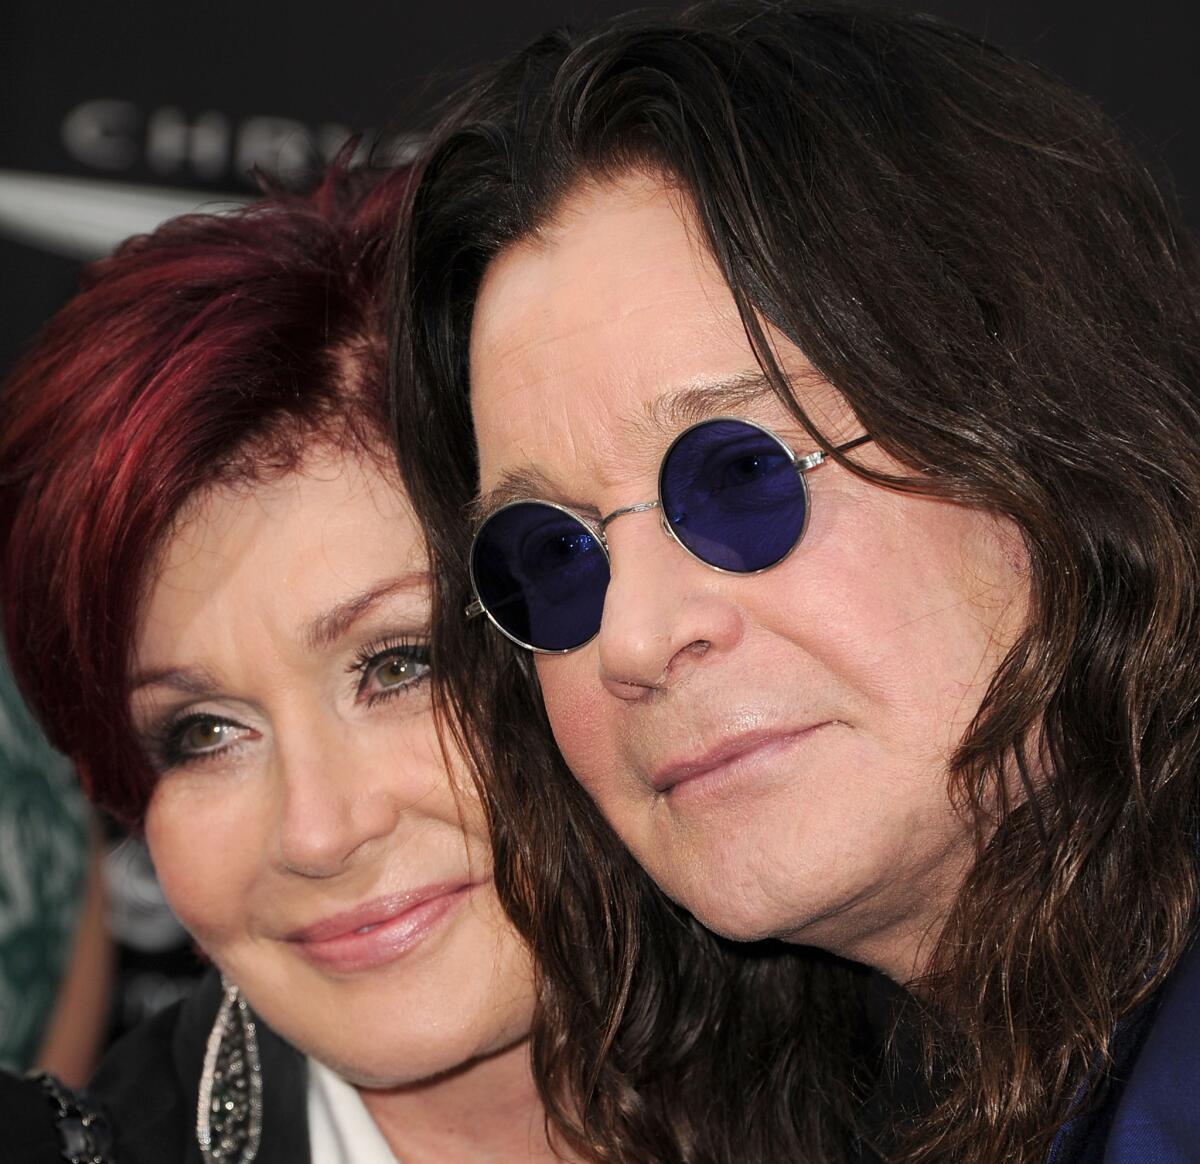 Sharon Osbourne and Ozzy Osbourne. On Thursday's edition of "The Talk," Osbourne apologized to the women on "The View."